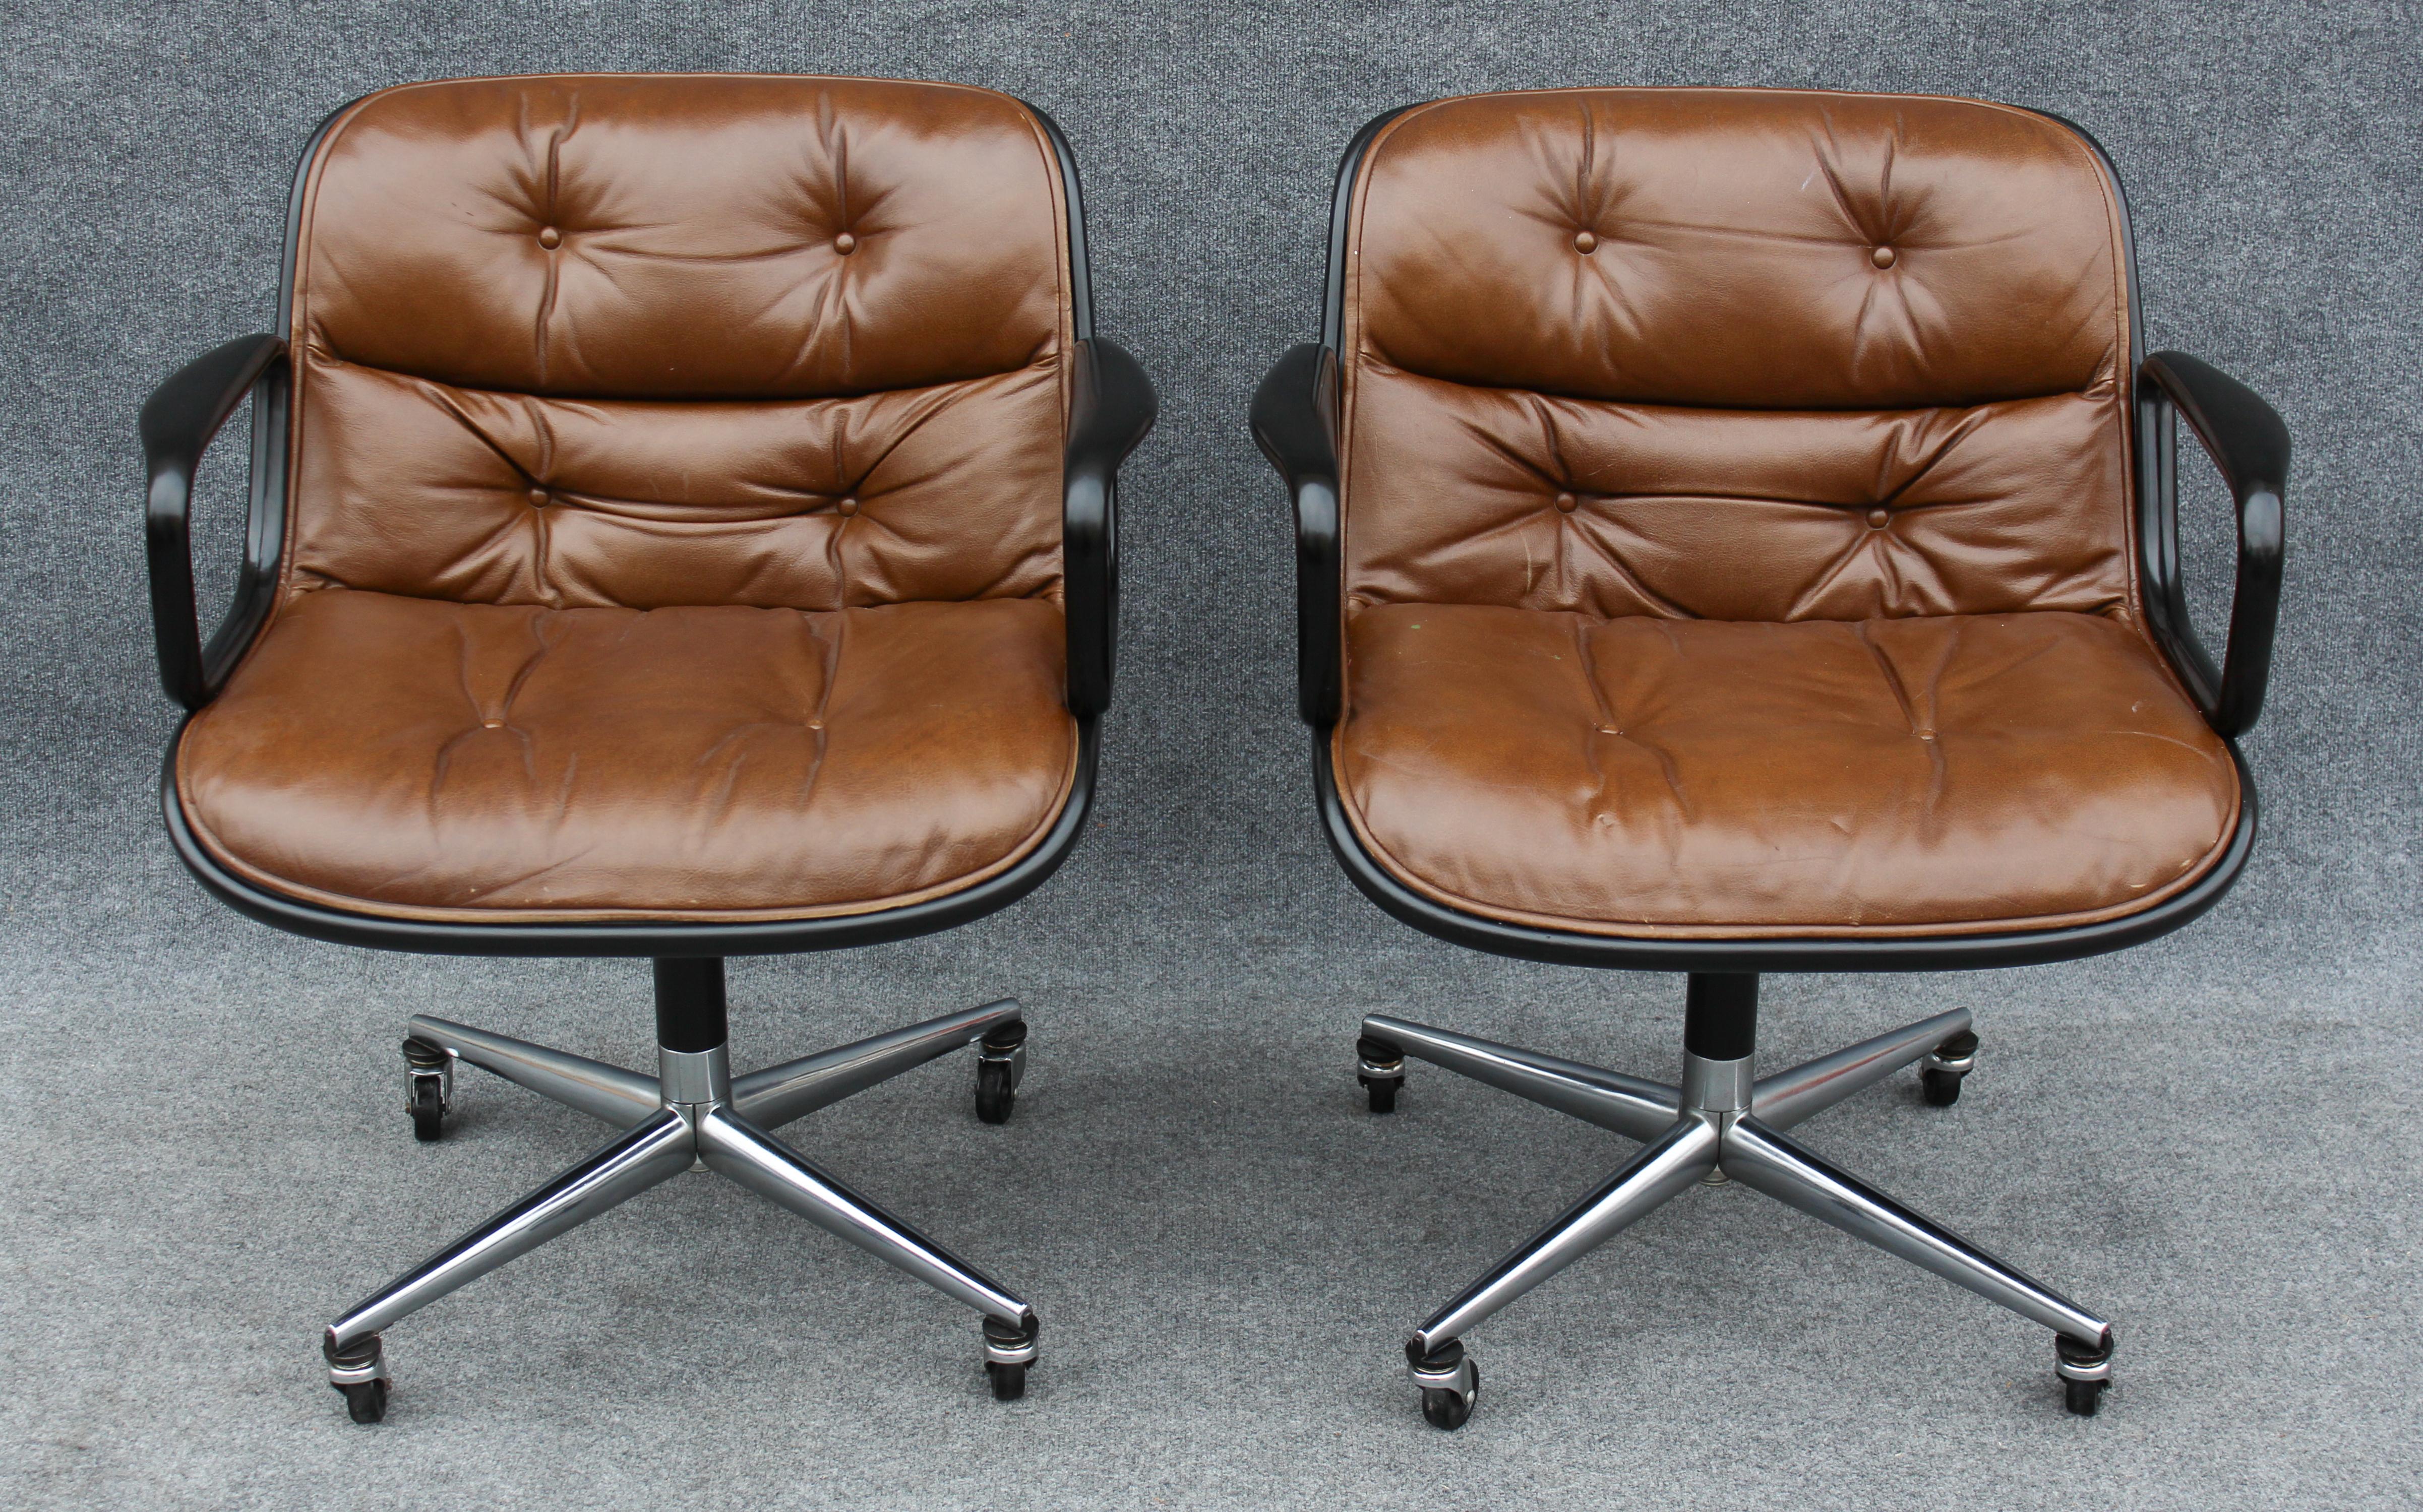 For your consideration: a pair of Charles Pollock for Knoll Armchairs. The chairs have dark brown leather and a black enameled outer frame and feature ovoid shaped four-star bases. All chairs have castors and tilt/swivel.

Condition: Both chairs